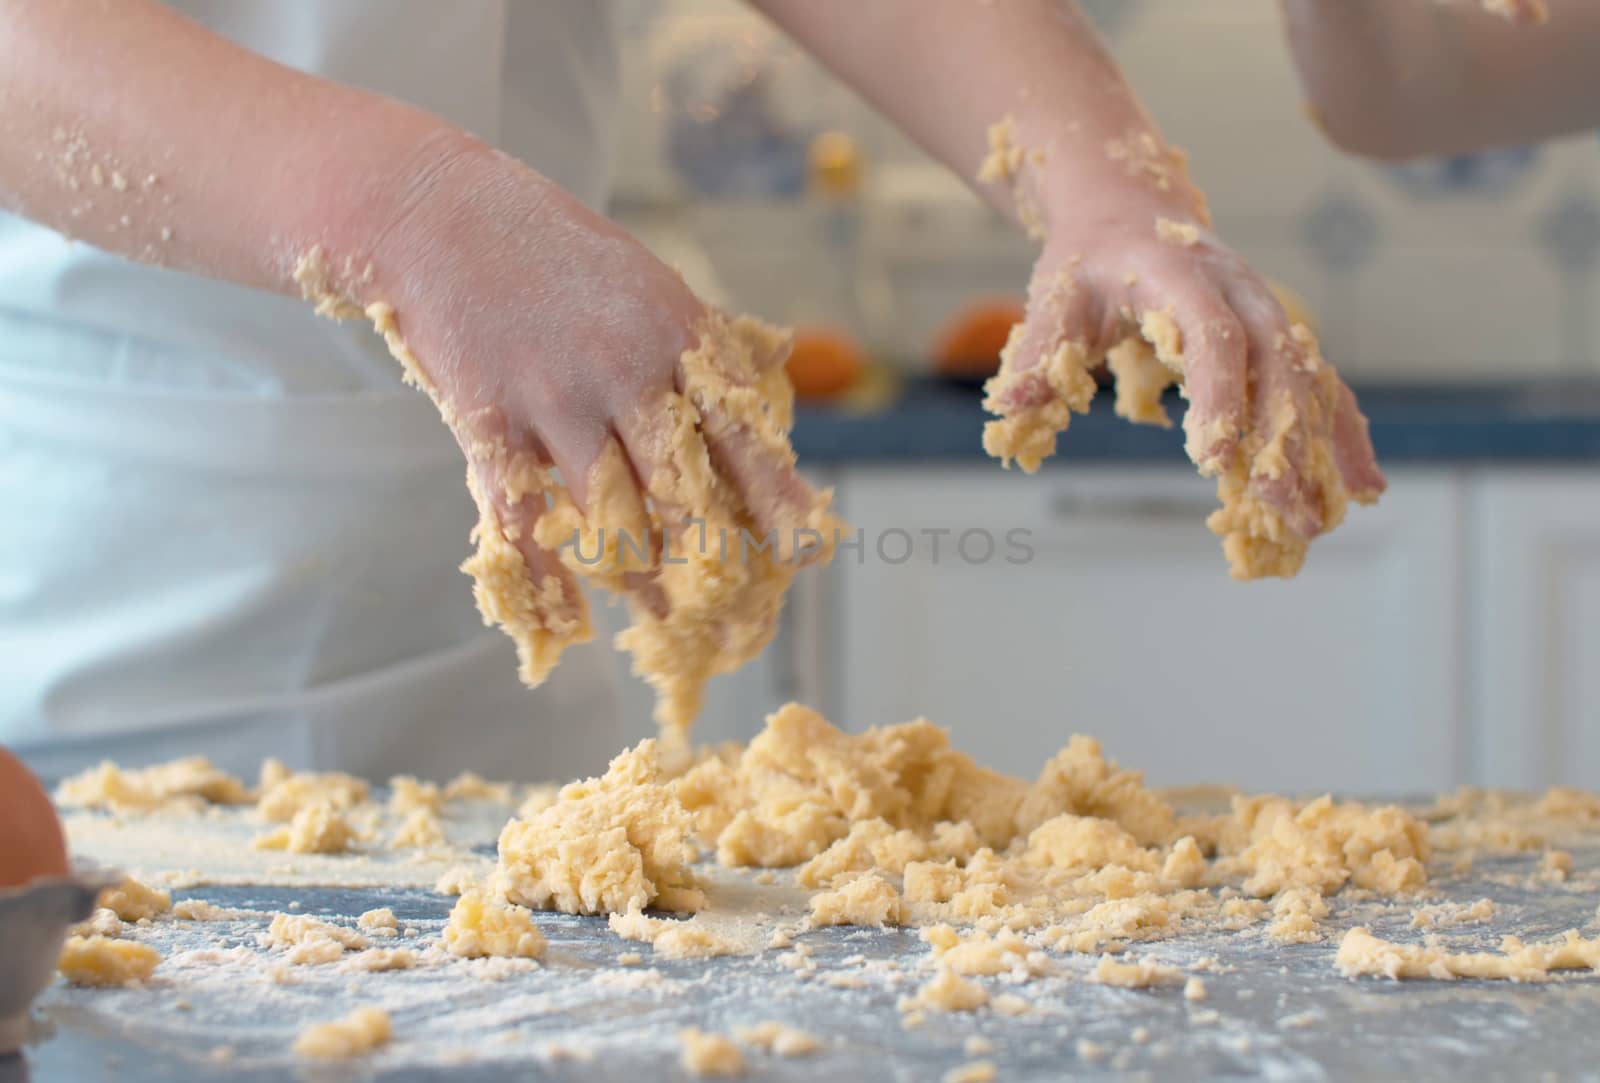 Close up child's hands in the dough. Kid cooking pastry in bright kitchen.